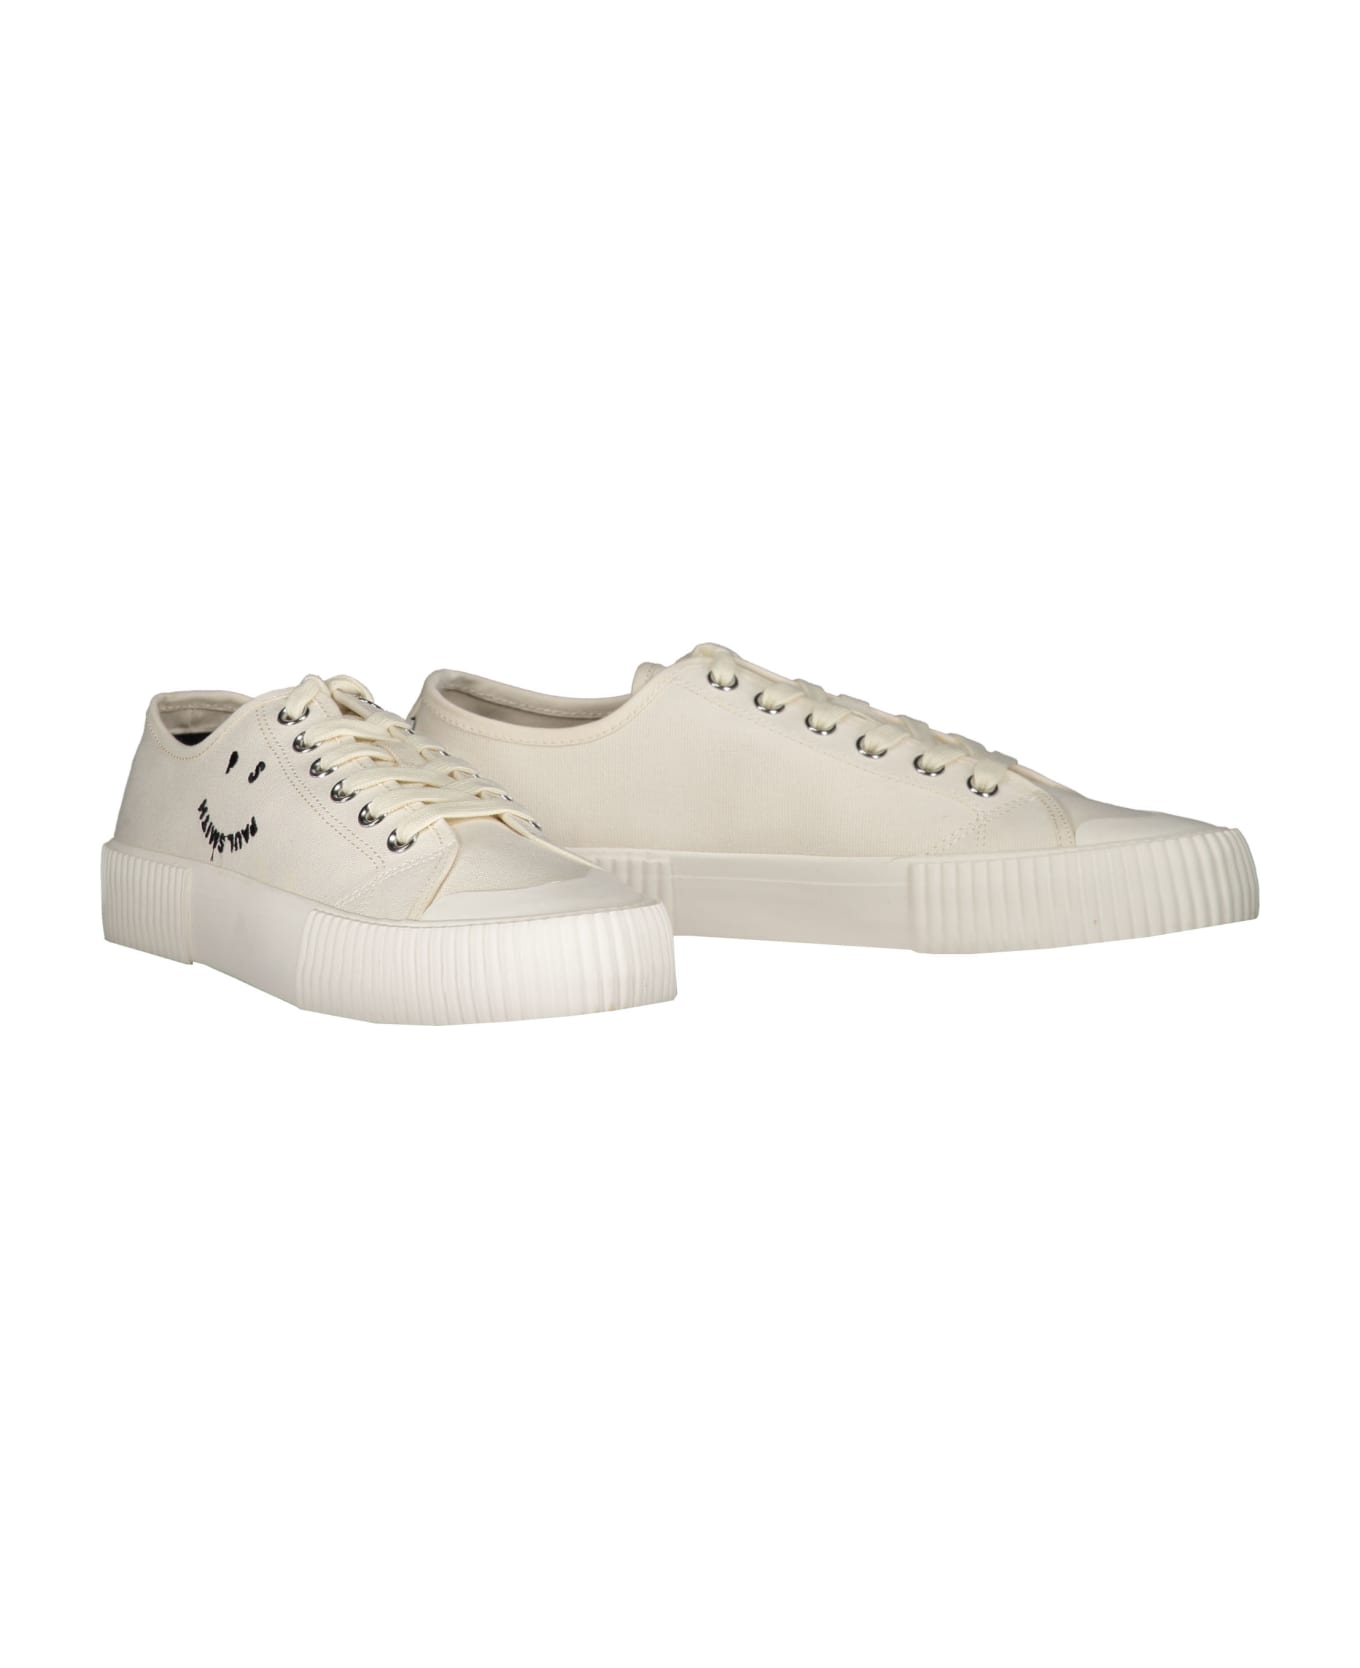 Paul Smith Canvas Low-top Sneakers - White